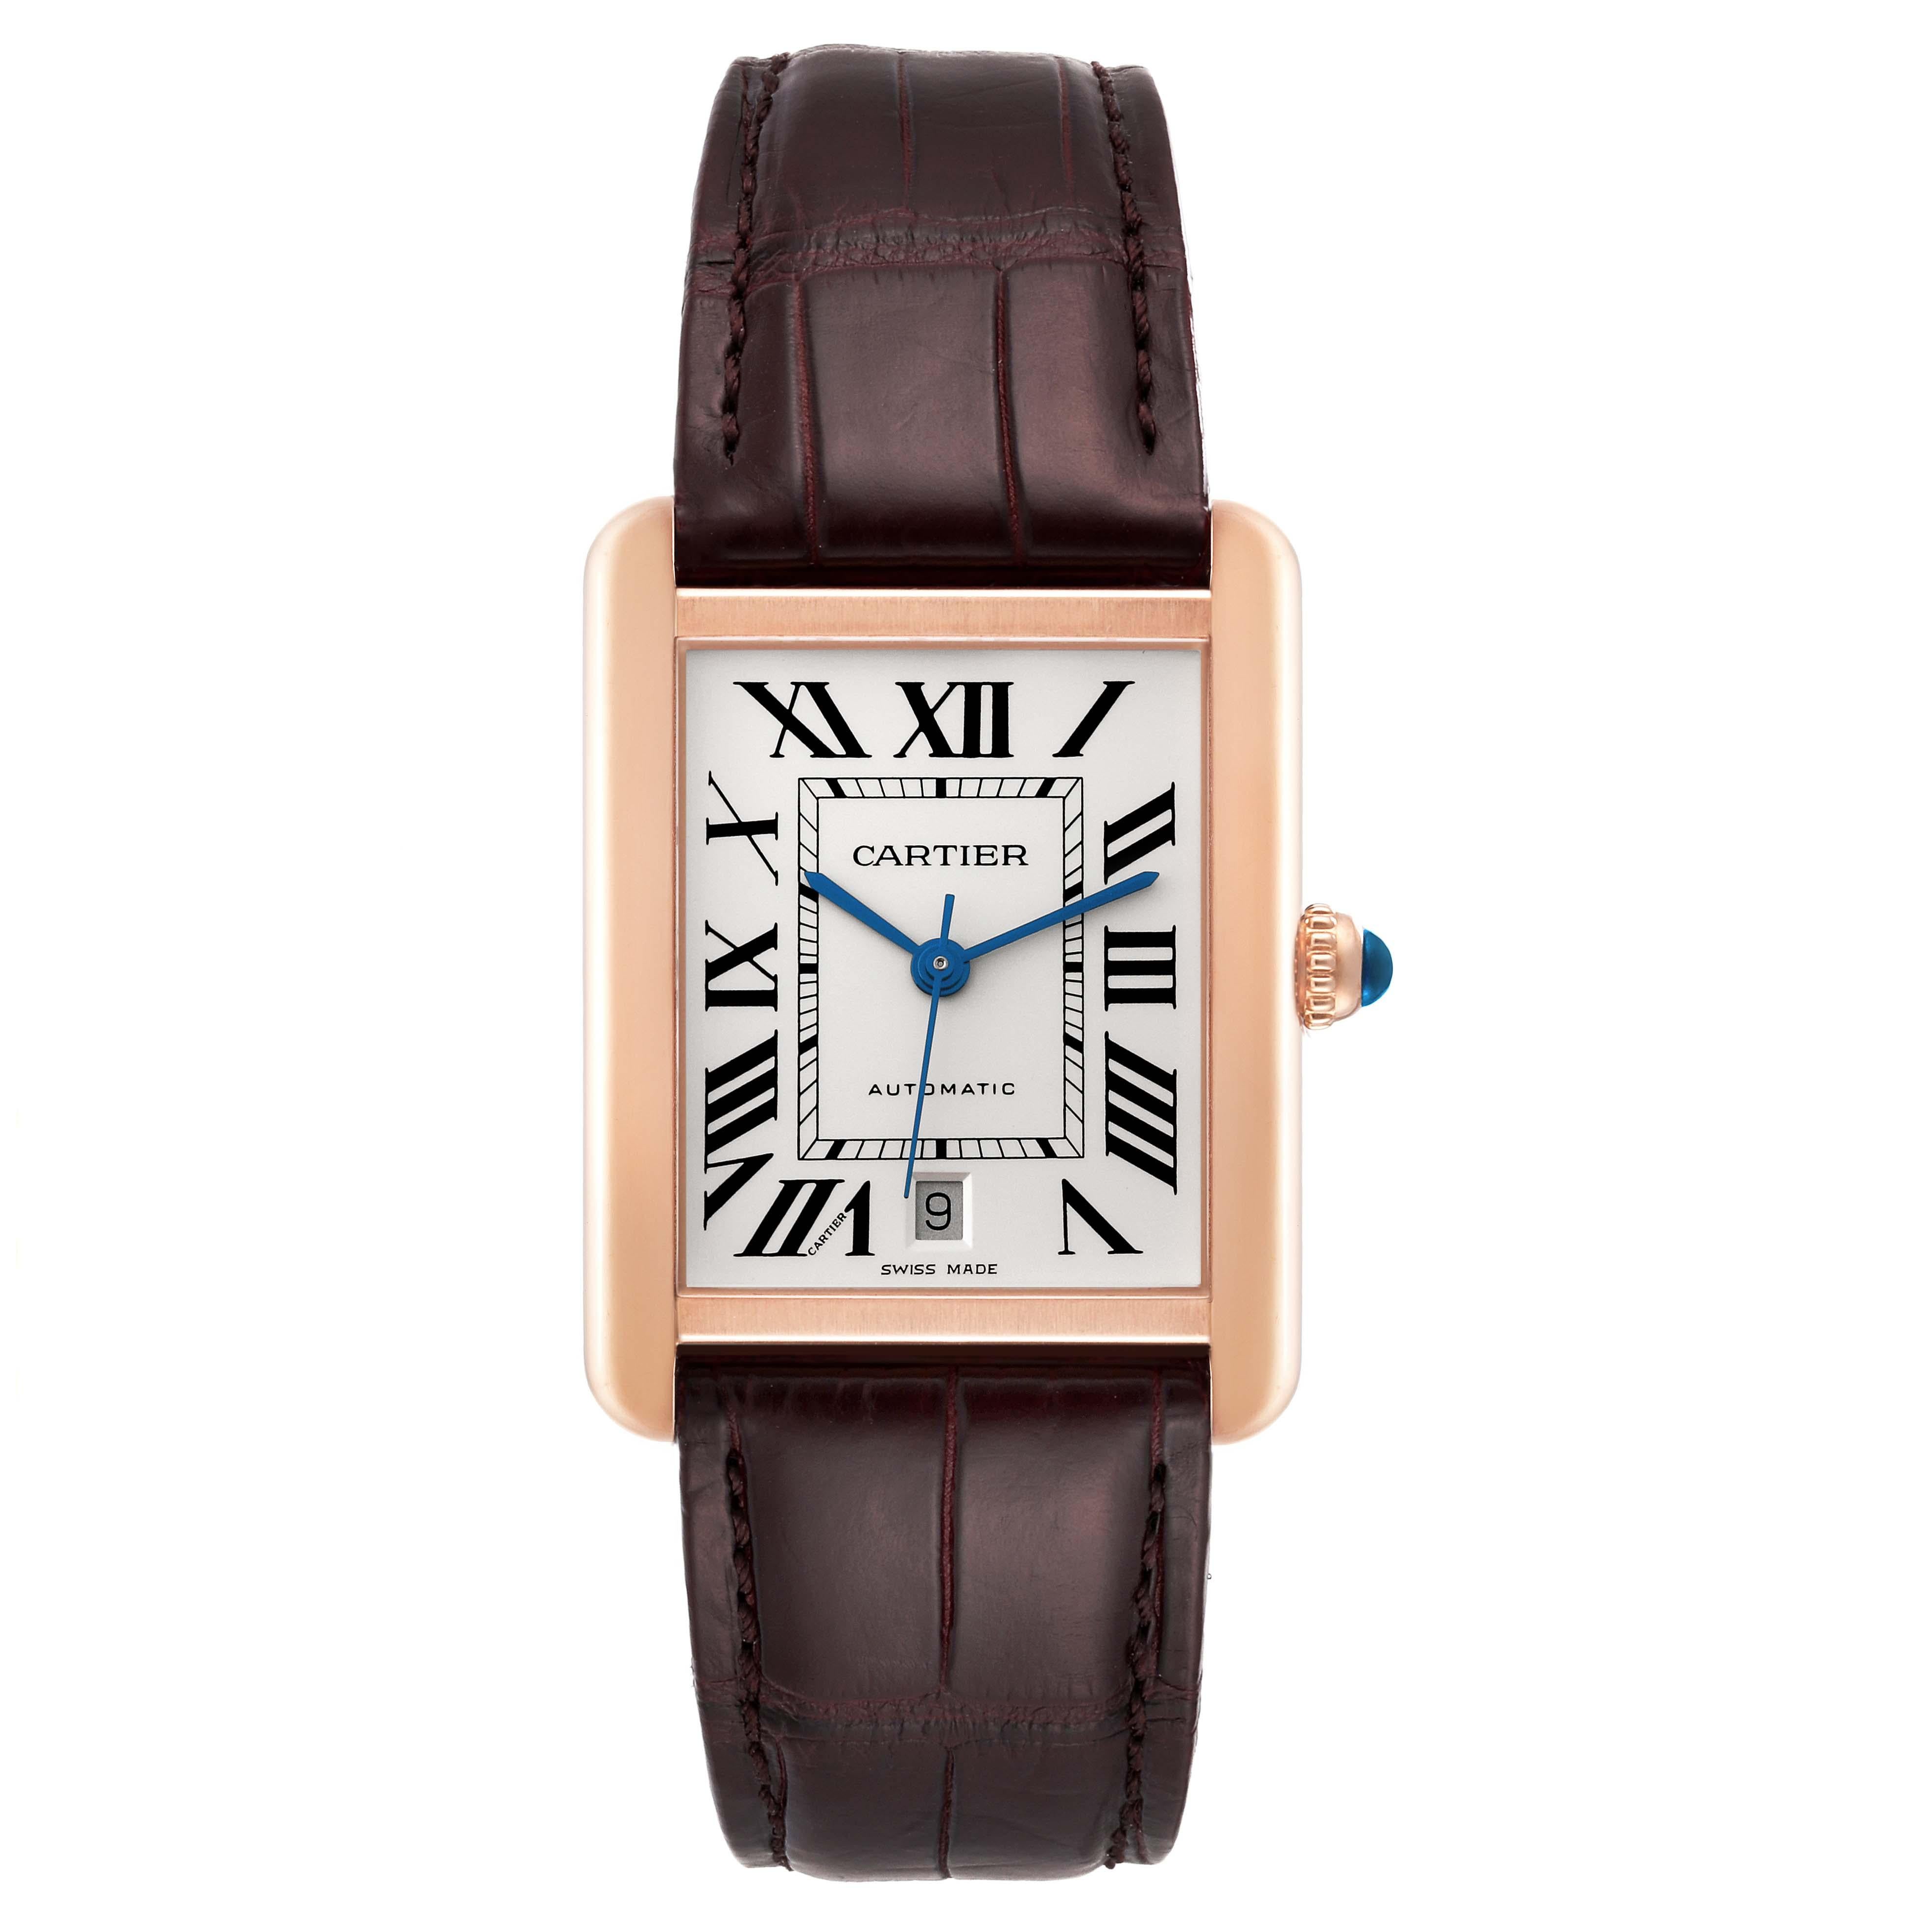 Cartier Tank Solo XL Rose Gold Silver Dial Mens Watch W5200026. Automatic self-winding movement. 18K rose gold case 31 mm x 41 mm. Stainless steel case back. Circular grained crown set with a blue spinel cabochon. . Scratch resistant sapphire